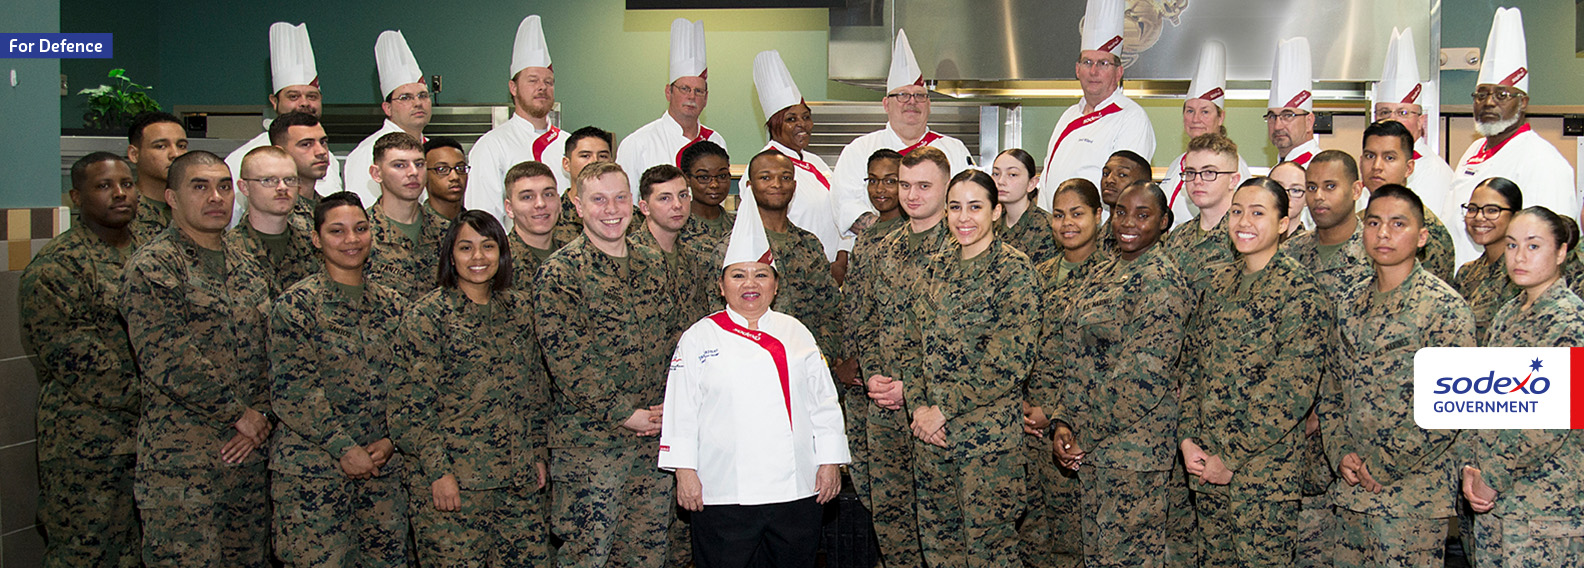 Group of male and female soldiers and sodexo military chefs posing together for a group photo